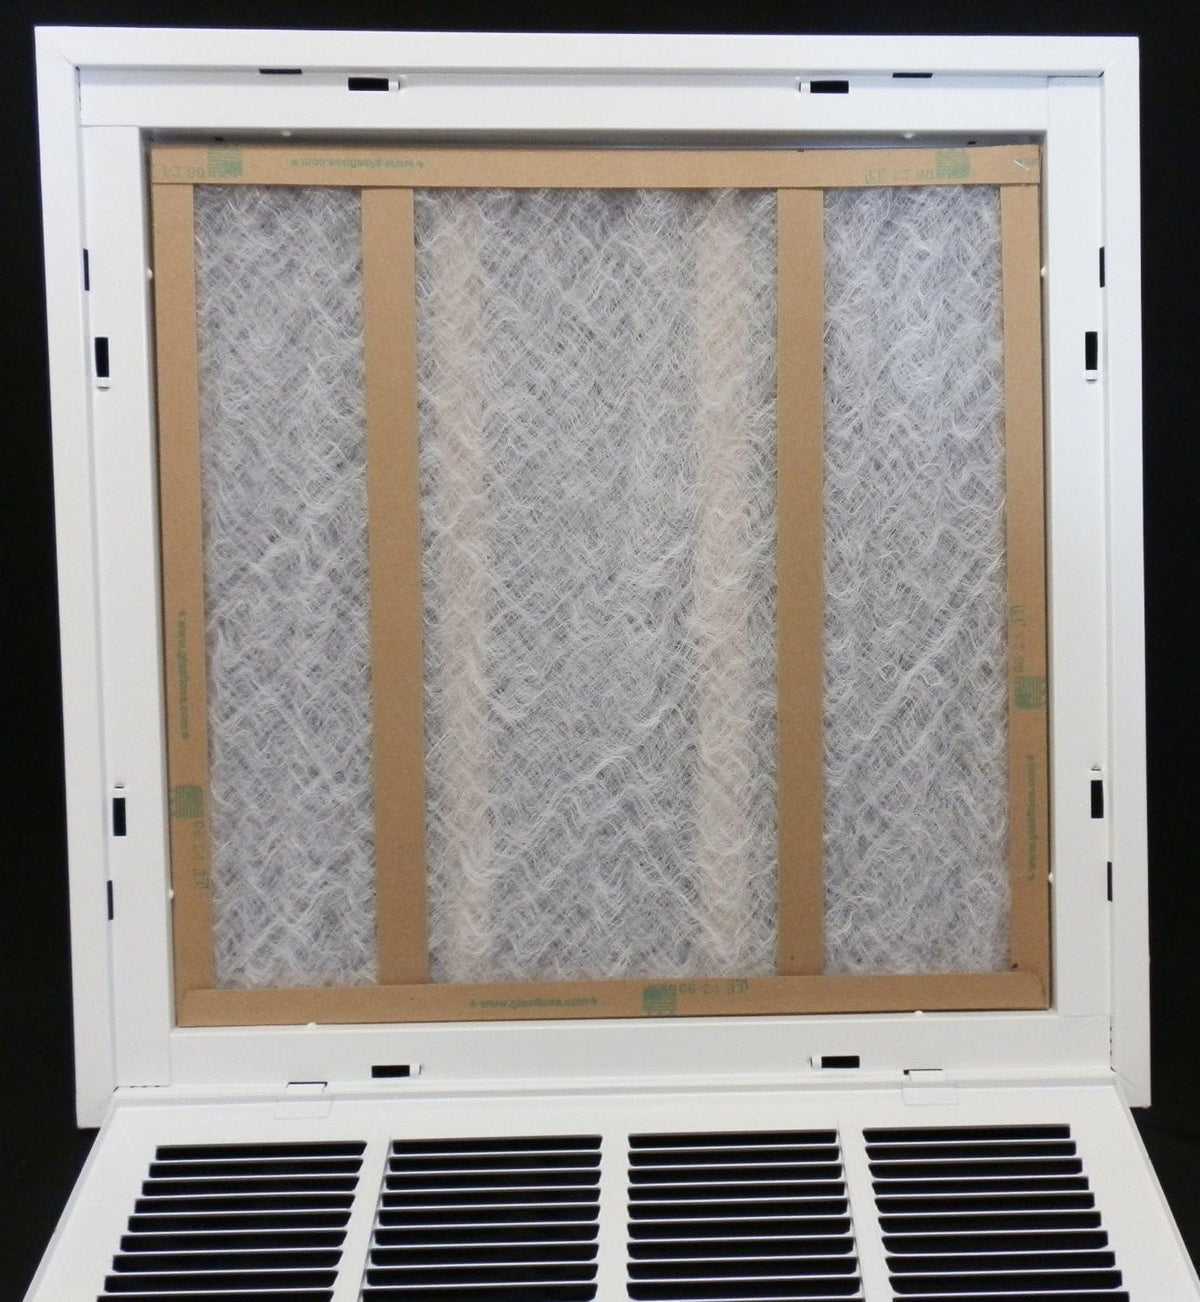 20&quot; X 16&quot; Steel Return Air Filter Grille for 1&quot; Filter - Removable Frame - * Filter Included * [Outer Dimensions: 22 5/8&quot; X 18 5/8&quot;]